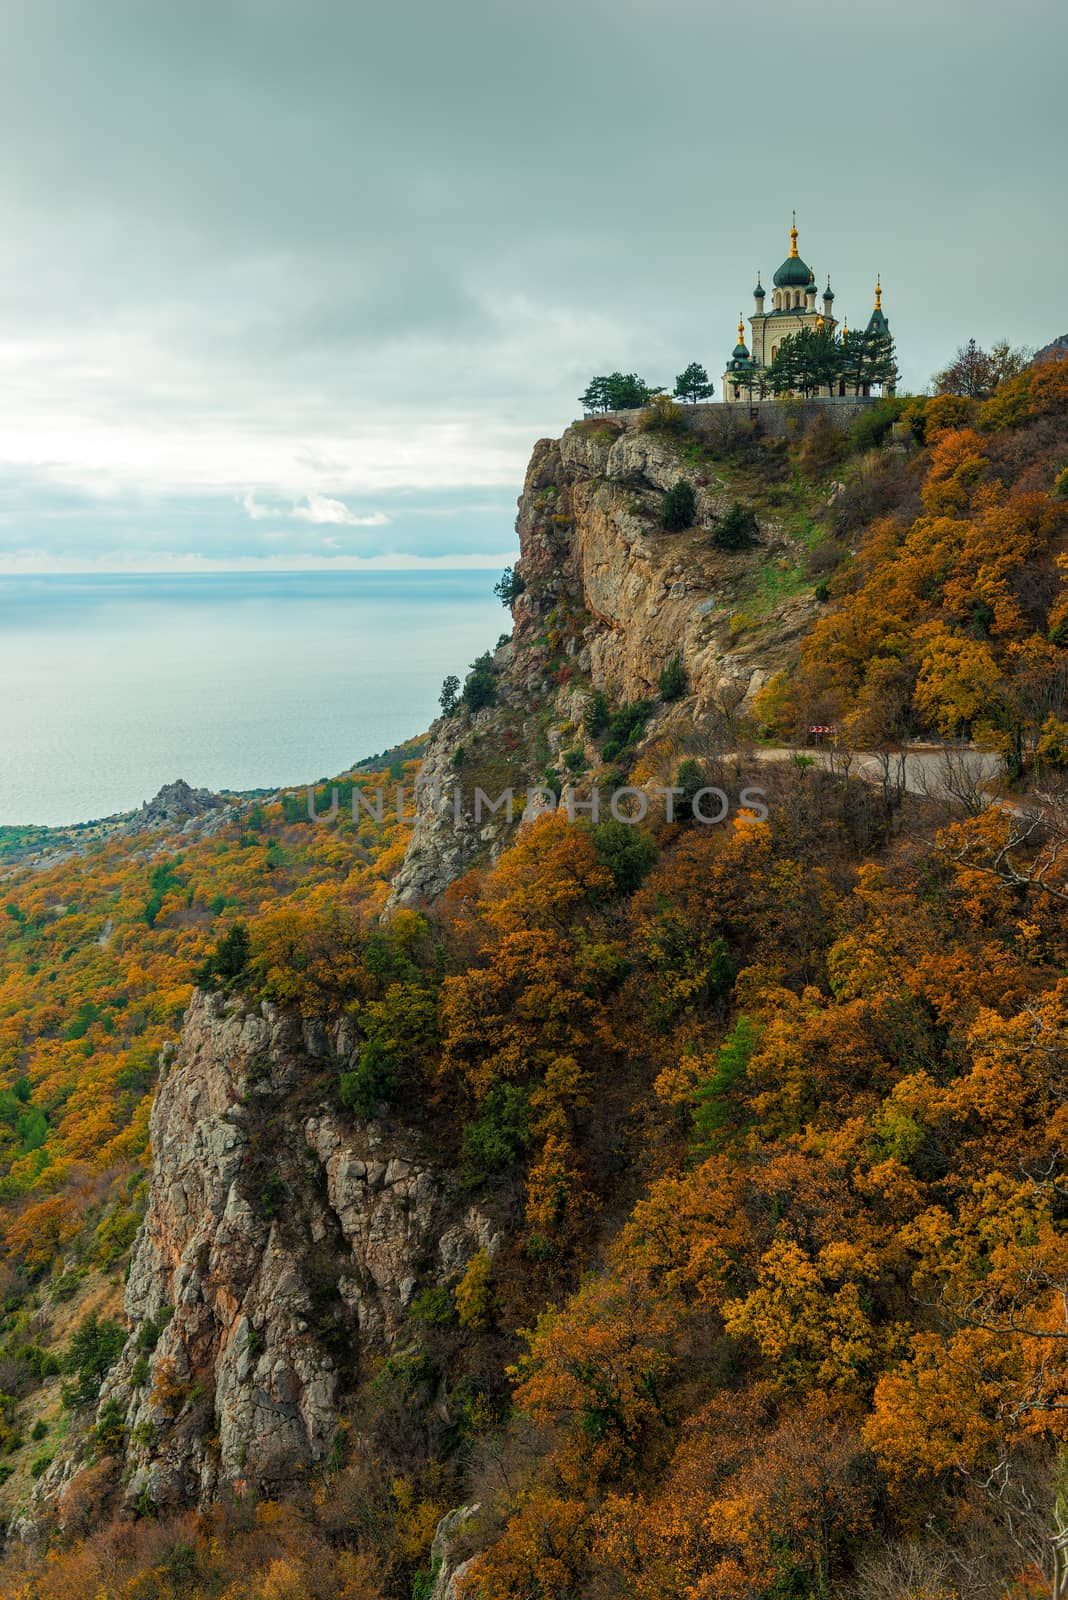 Autumn landscape, view of Foros church in Crimea against the background of the Black Sea, Russia. Temple of the Resurrection of Christ.